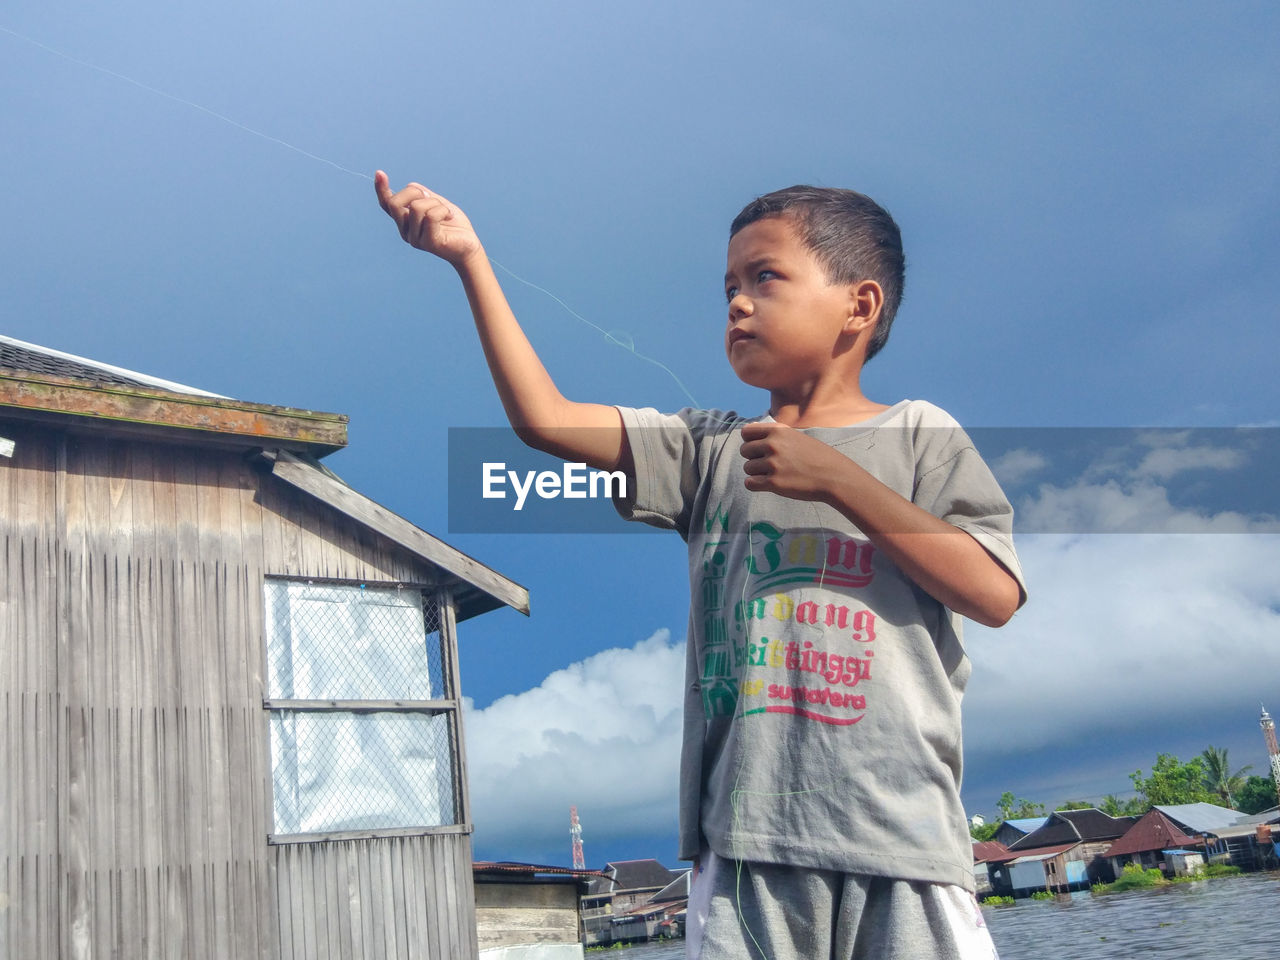 Boy holding string while standing against blue sky